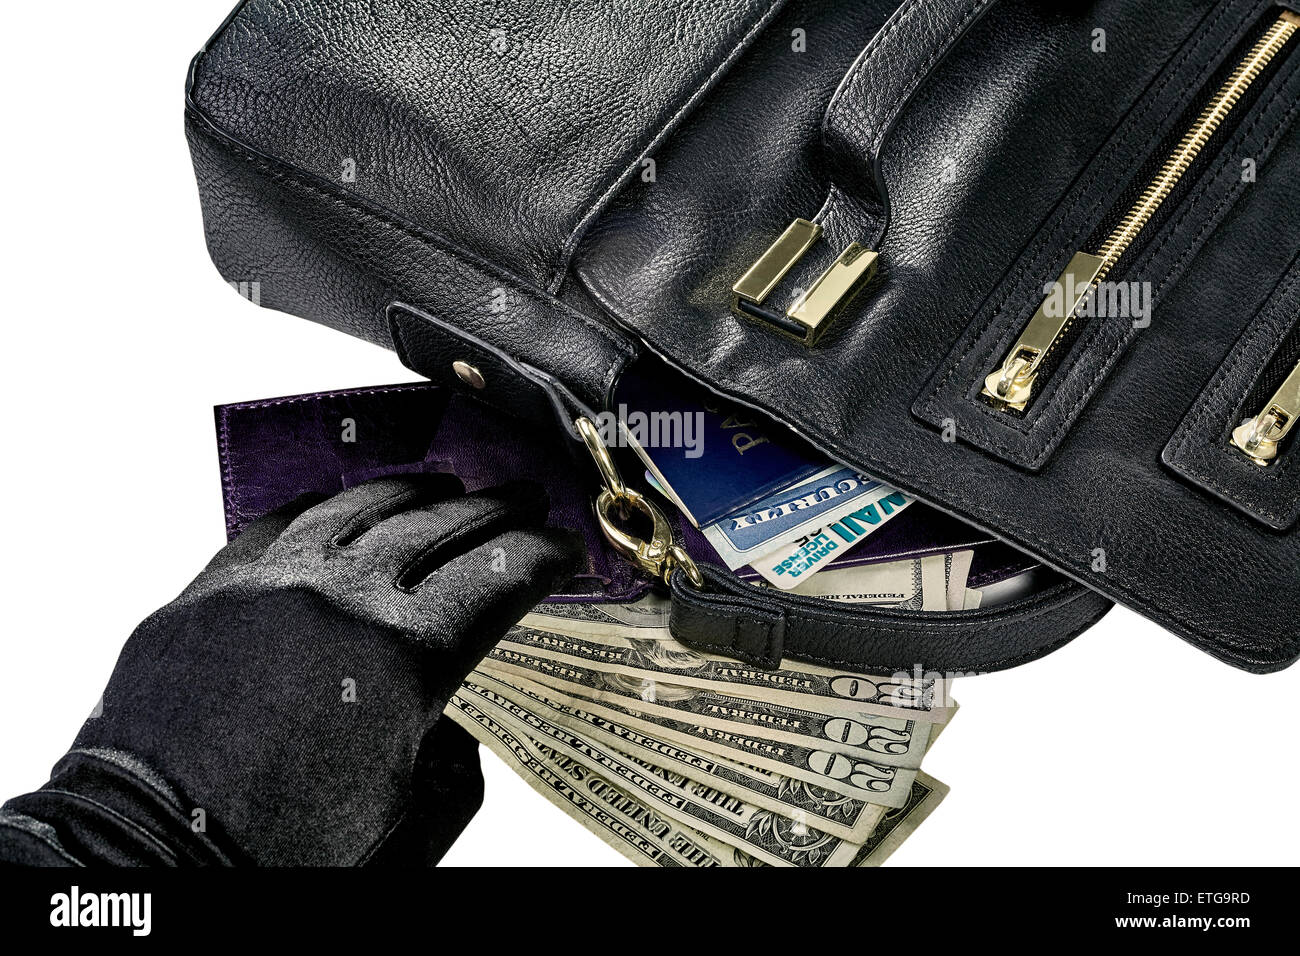 Women's purse with contents spilled including money, wallet, passport, social security card and driver's license and a hand reac Stock Photo